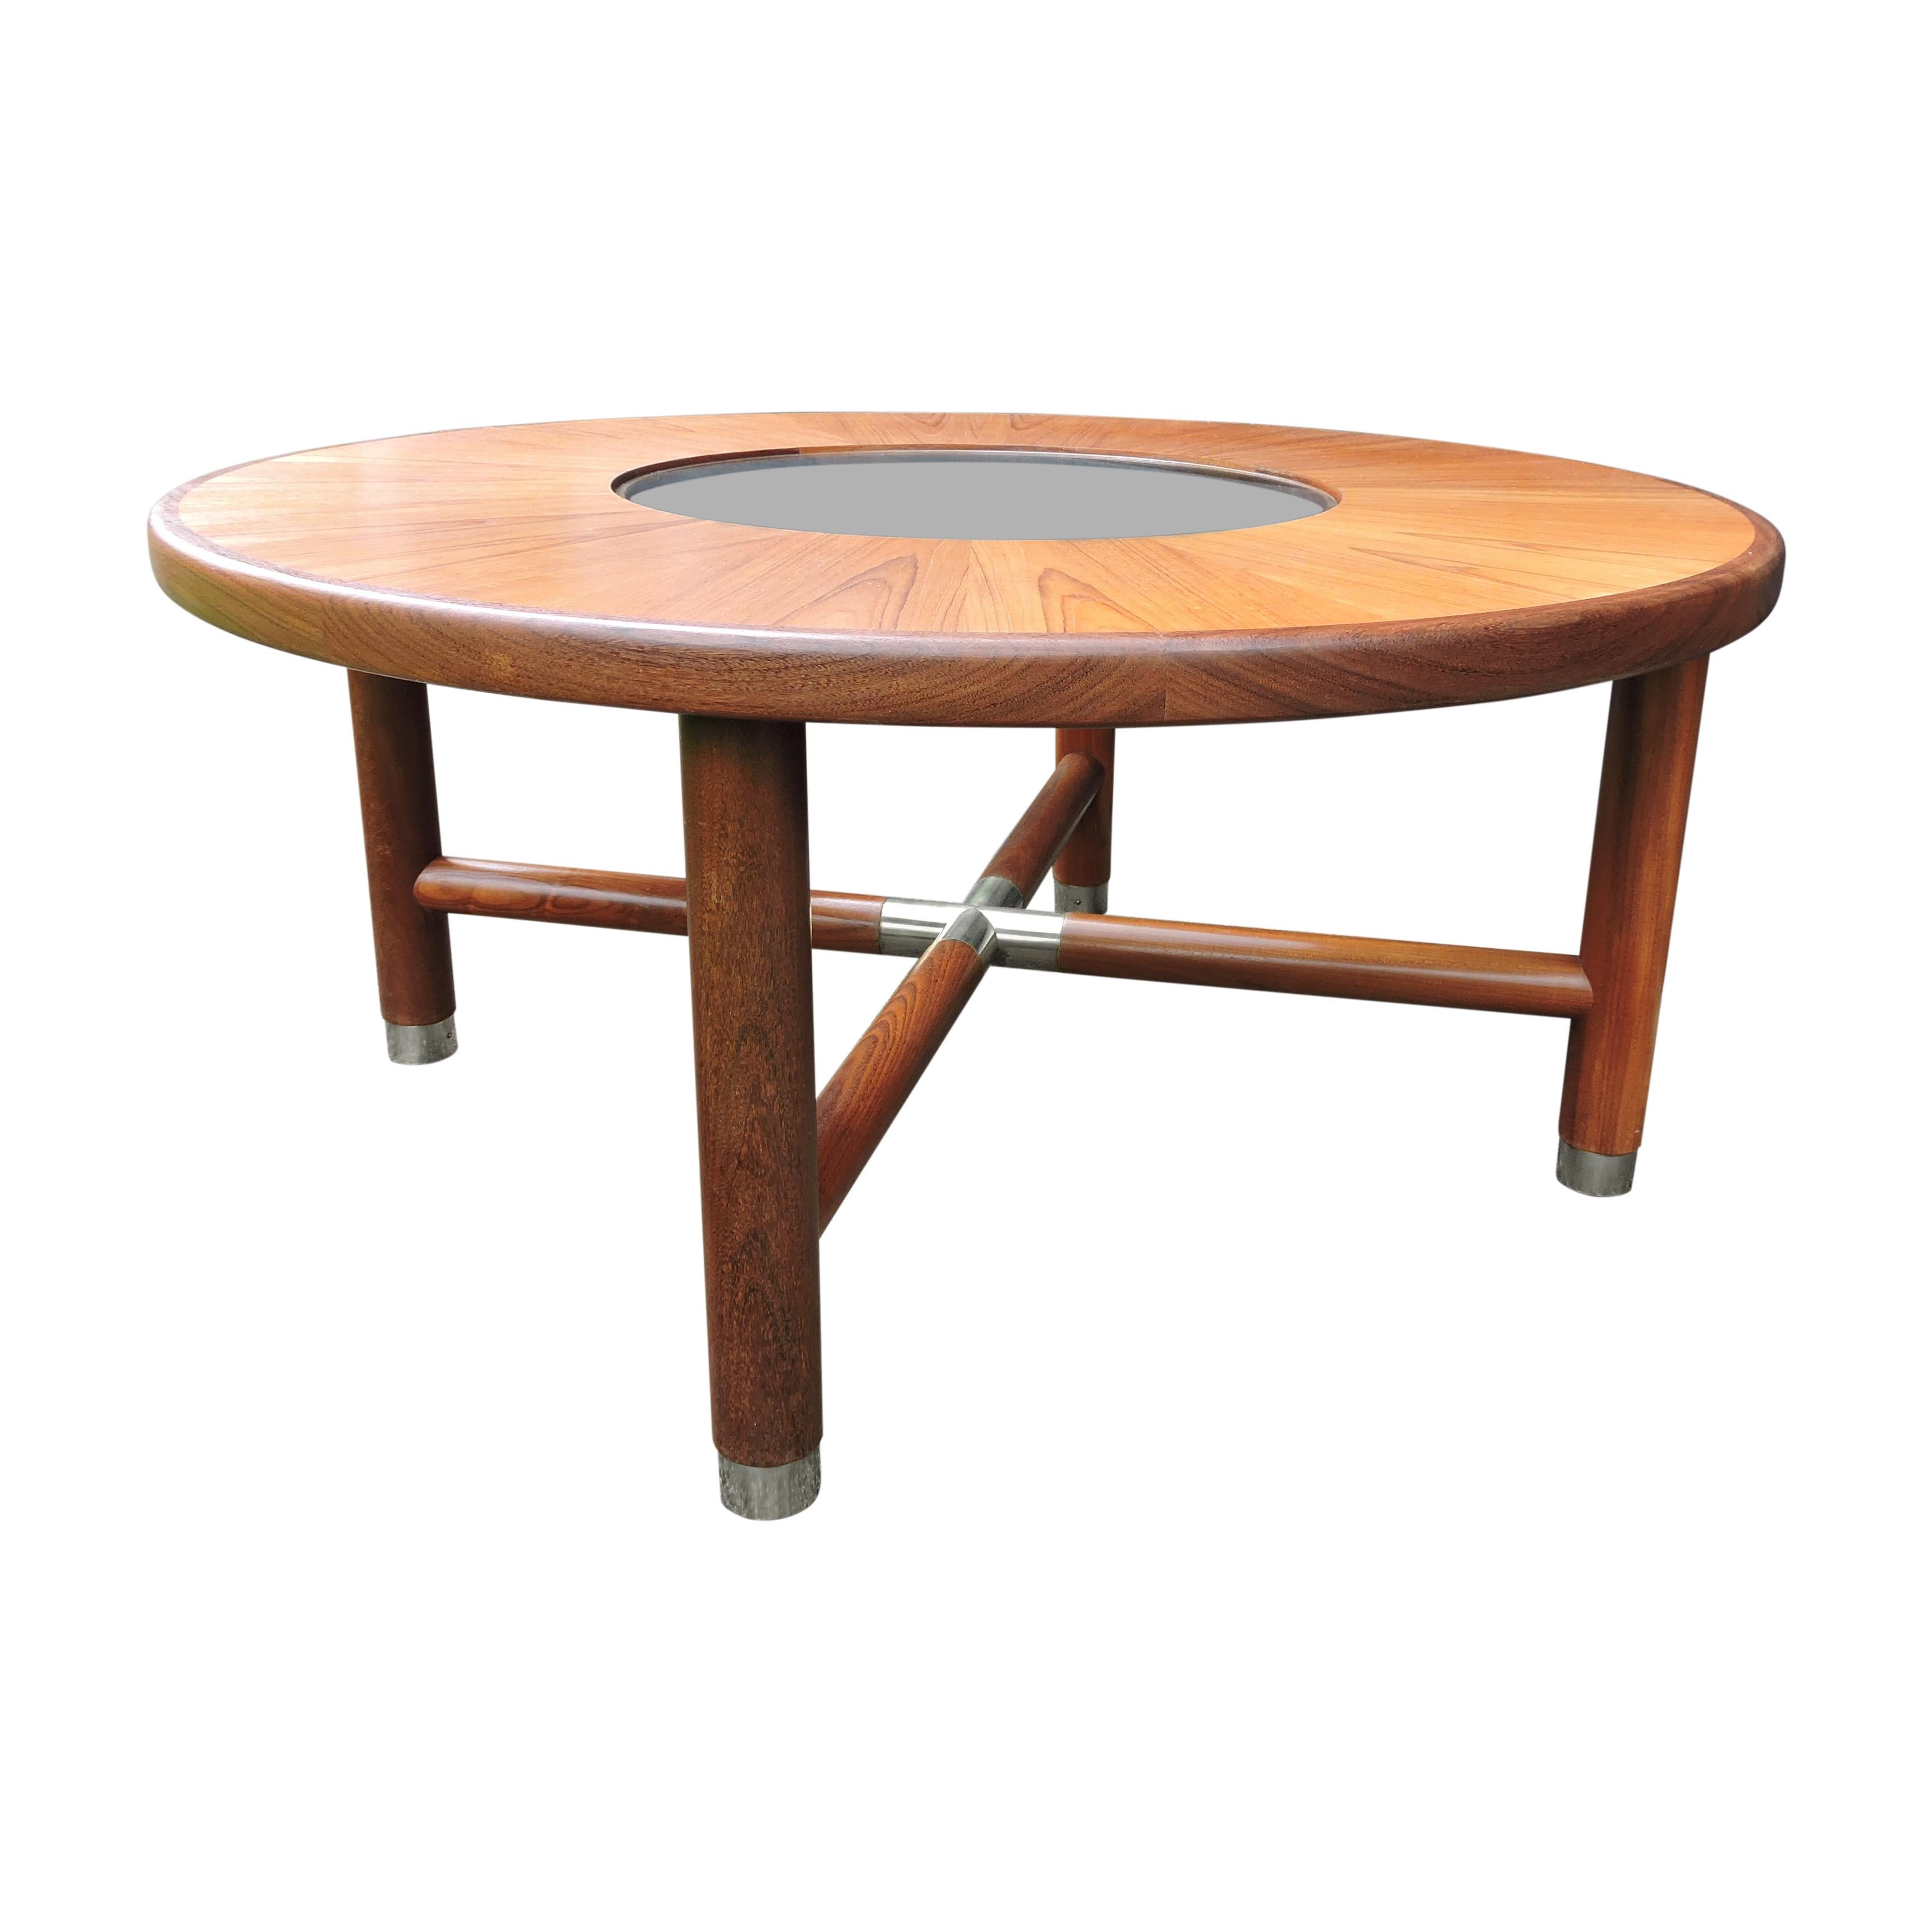 A 1960s round teak and glass coffee table by G-Plan featuring brass ended legs and centre cross.